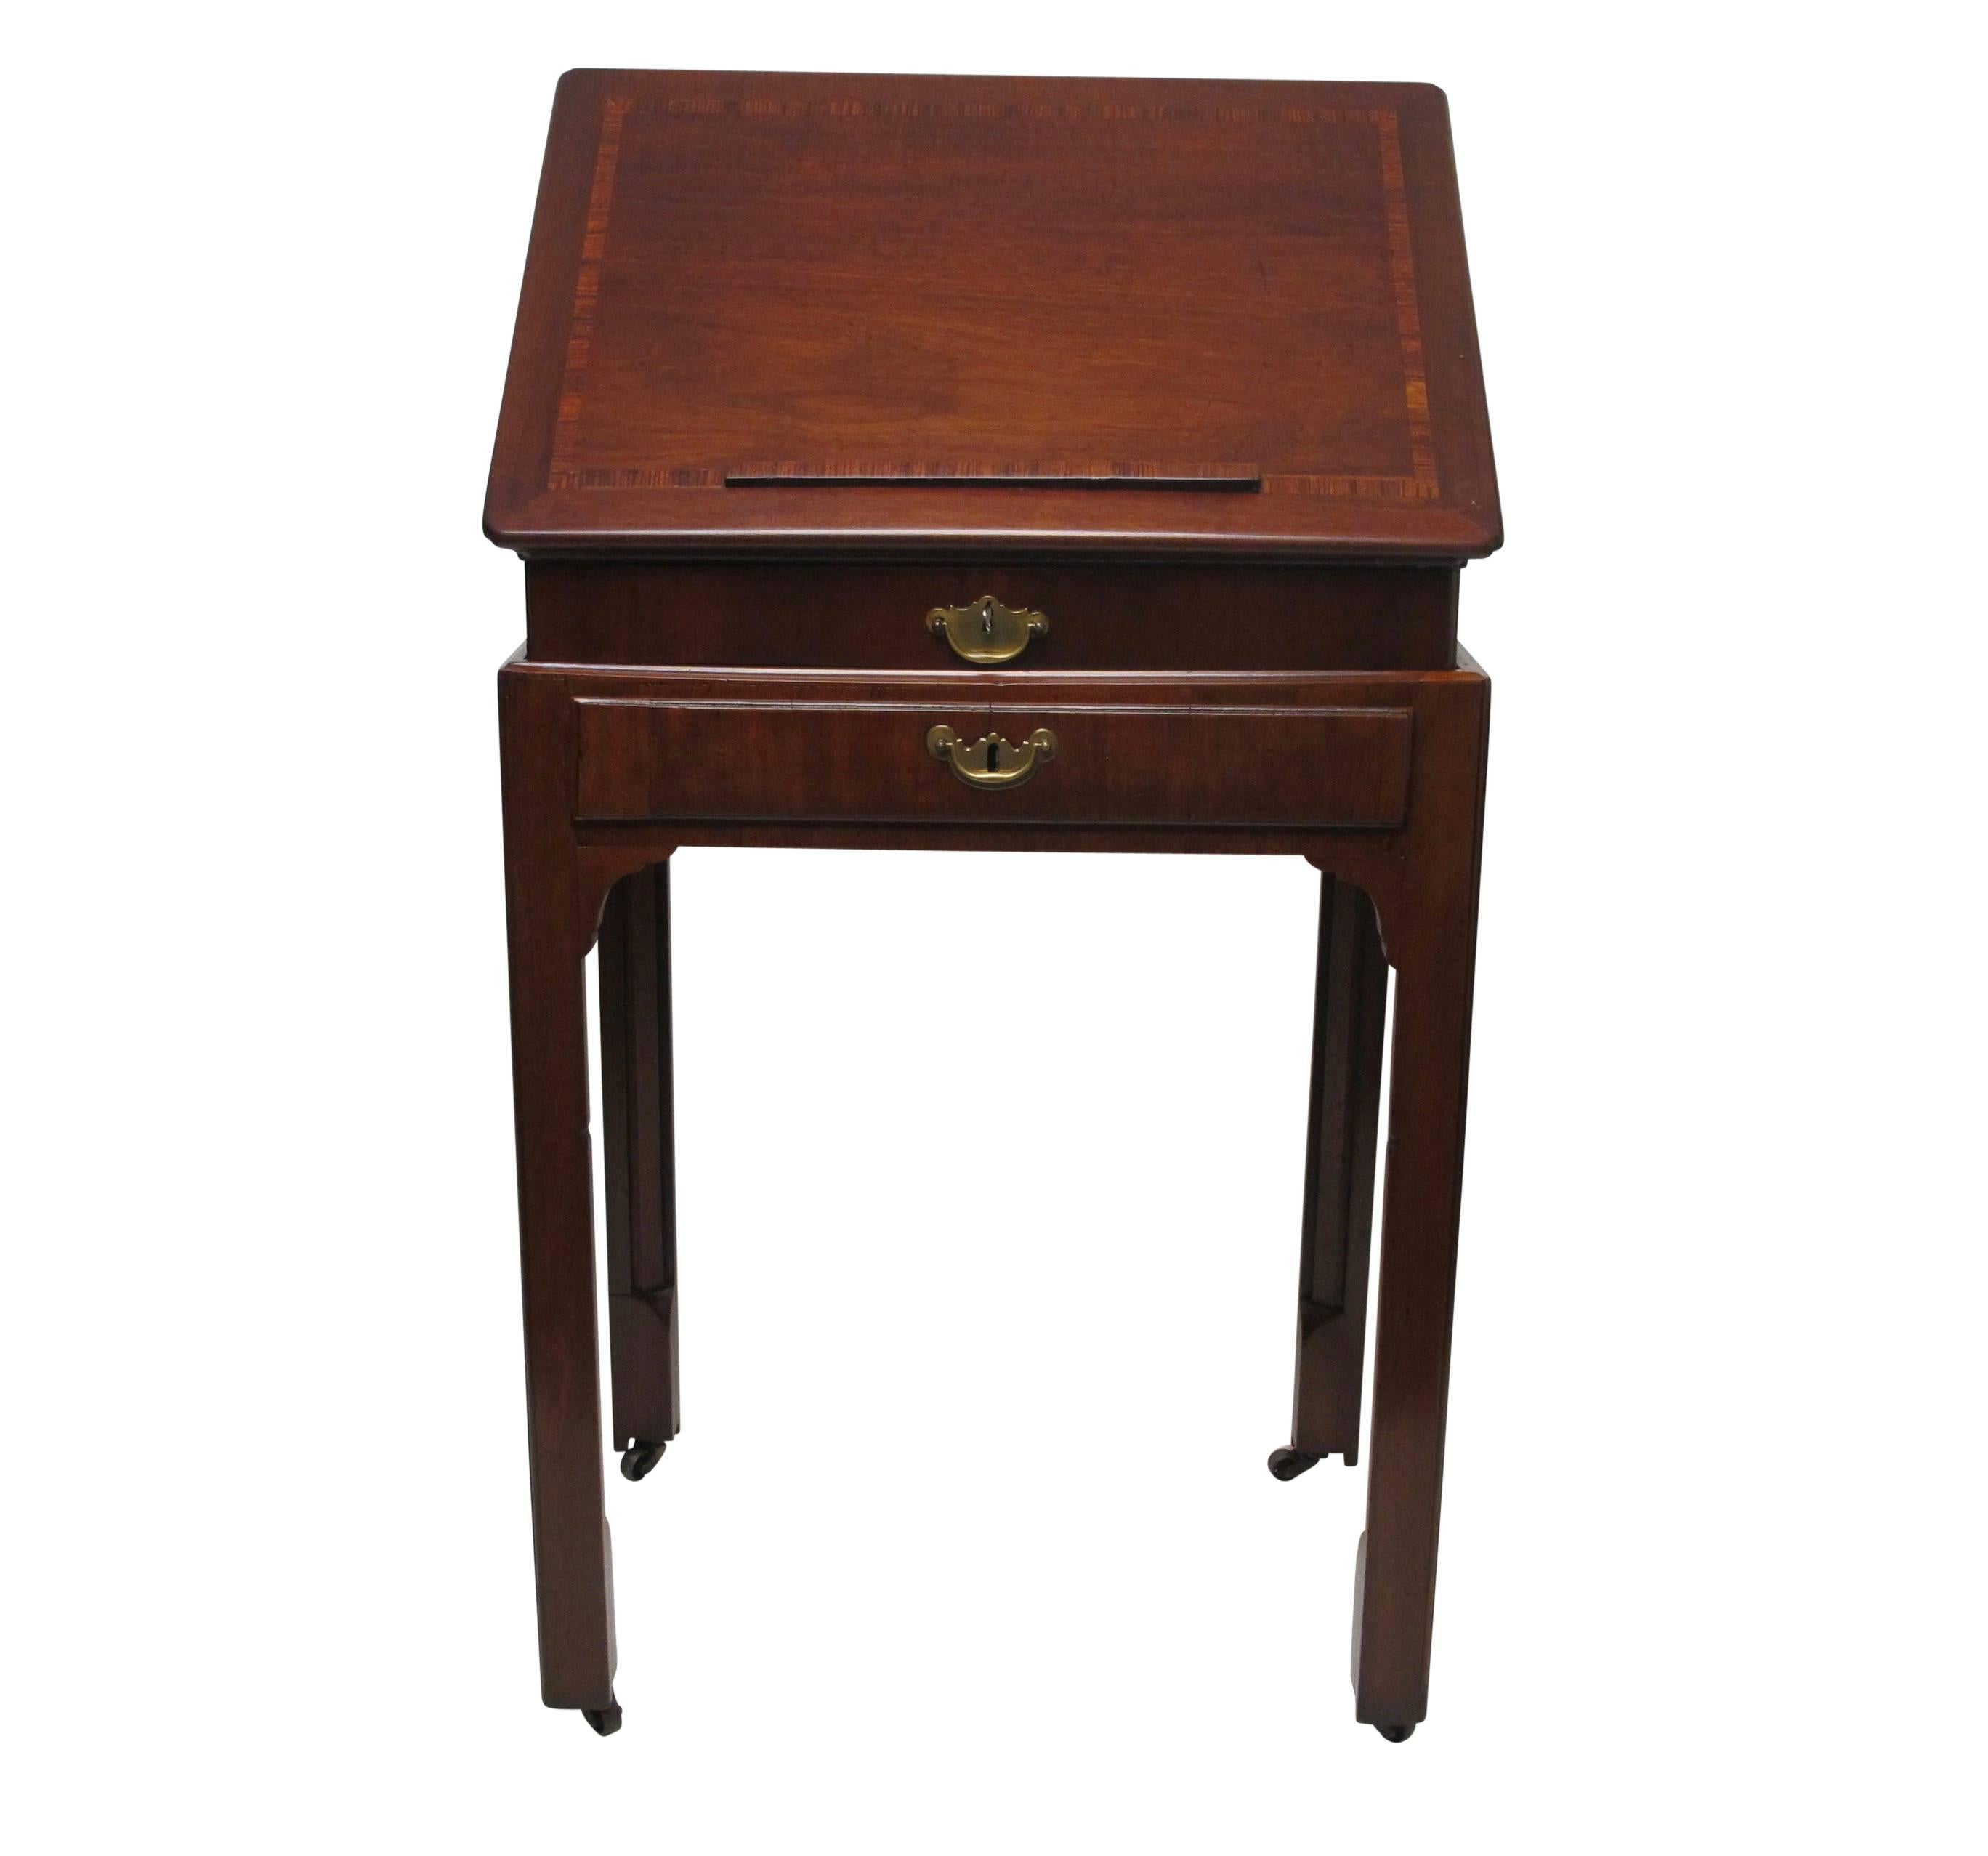 Wonderful old portable podium style reading stand or lectern. Mahogany with satinwood and rosewood inlay, the top having an adjustable support to raise and lower the reading angle. The lower section with two drawers, and having interesting and